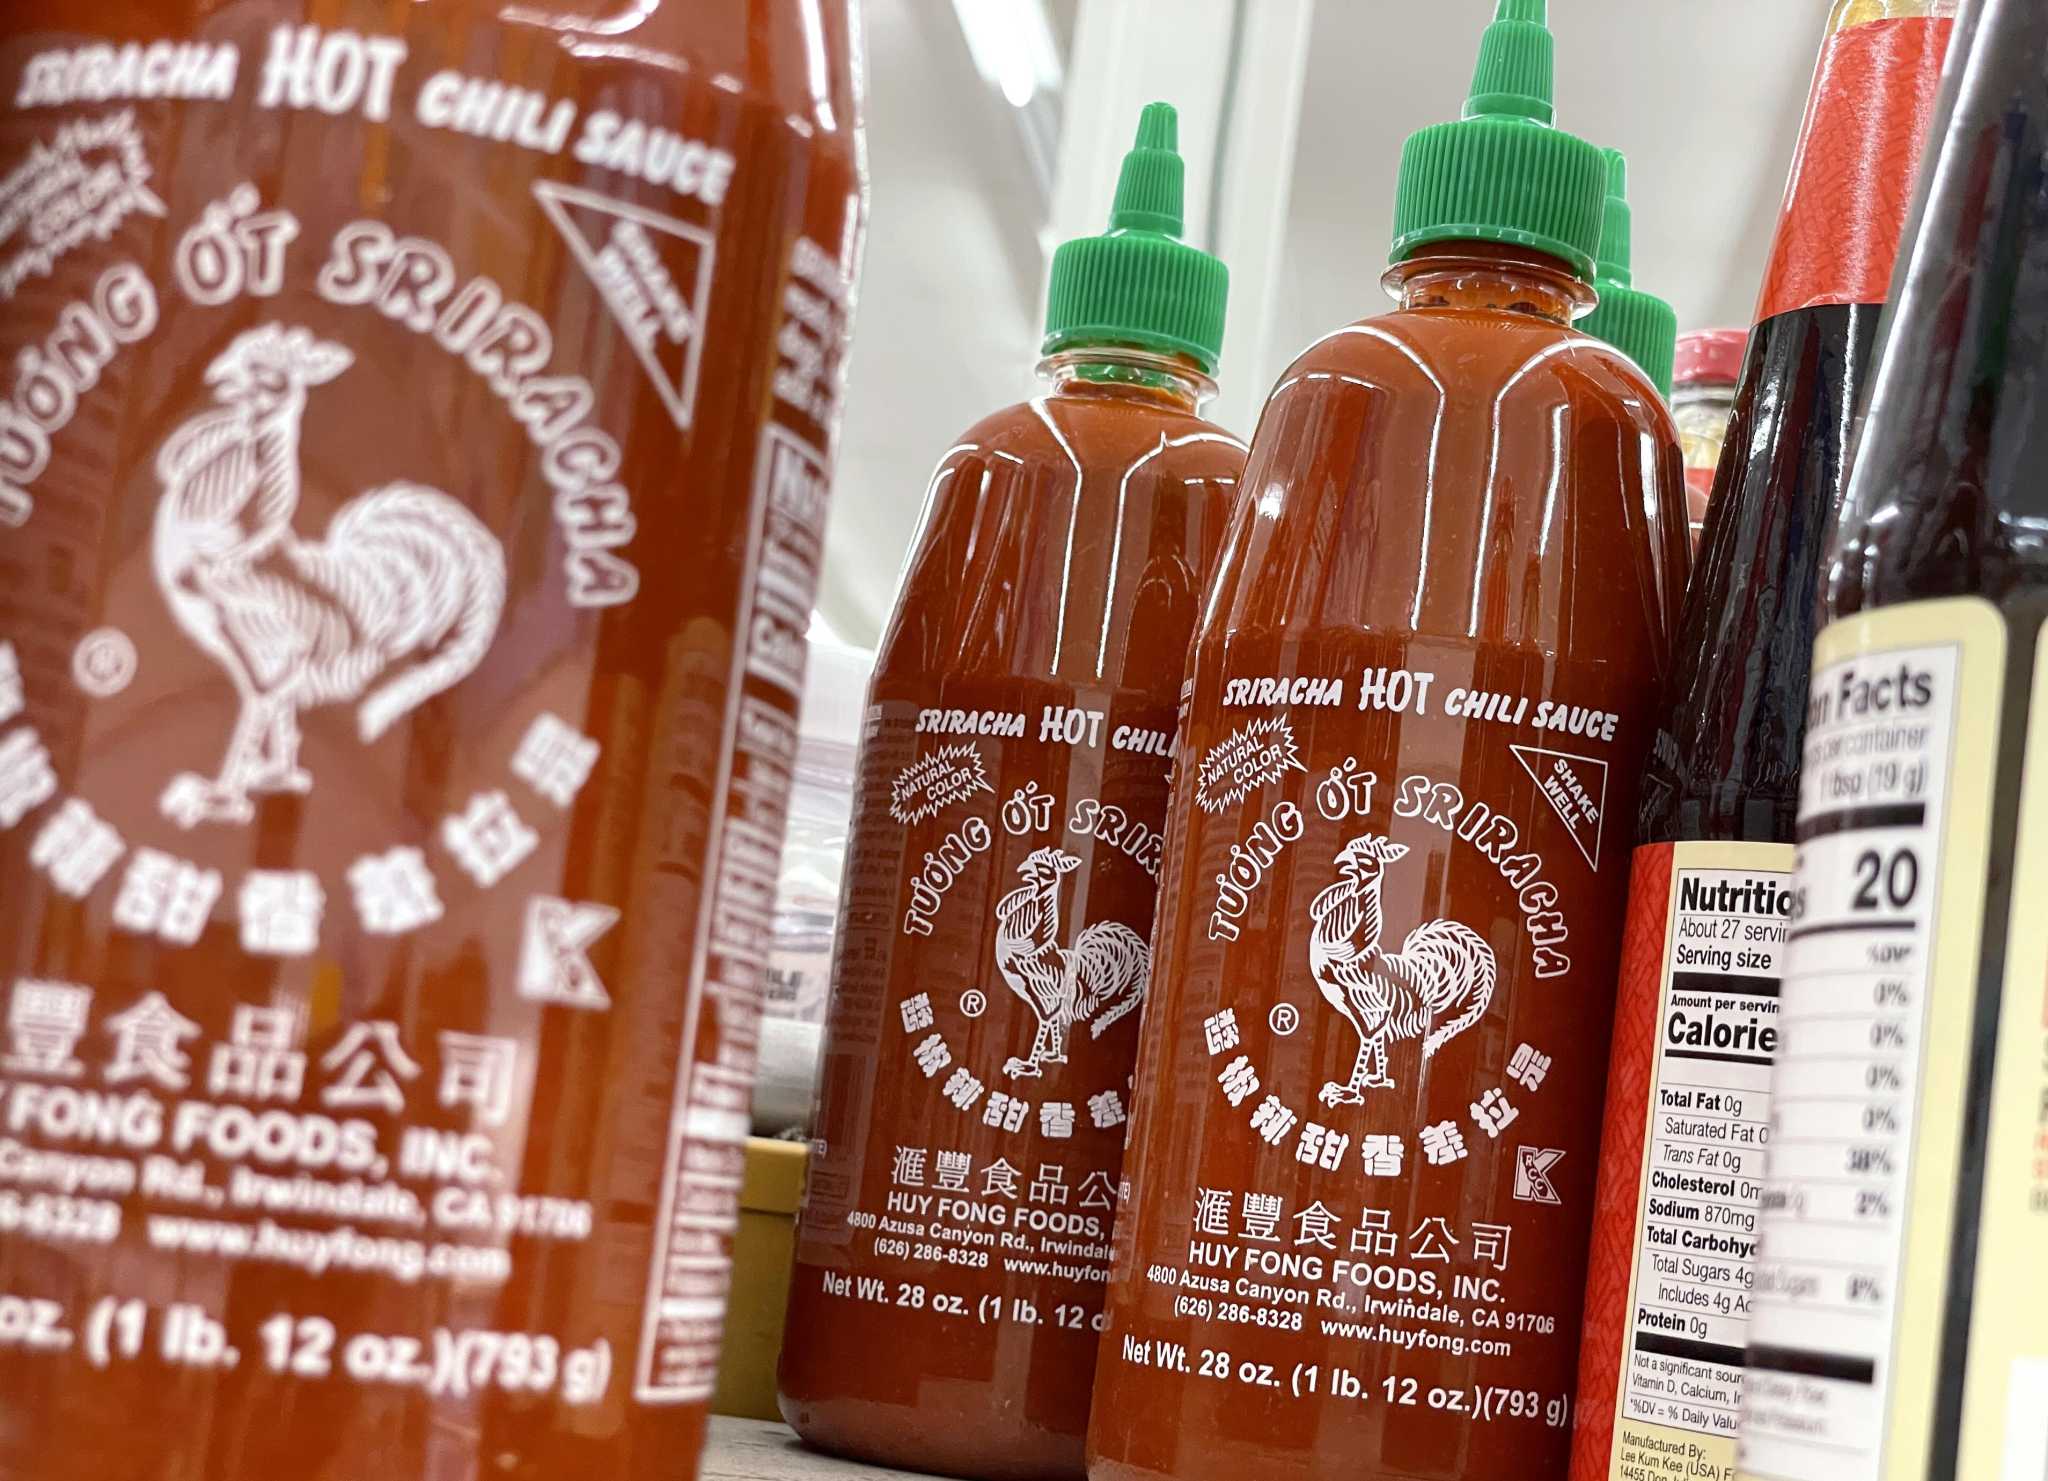 Can’t find Sriracha? There’s a shortage